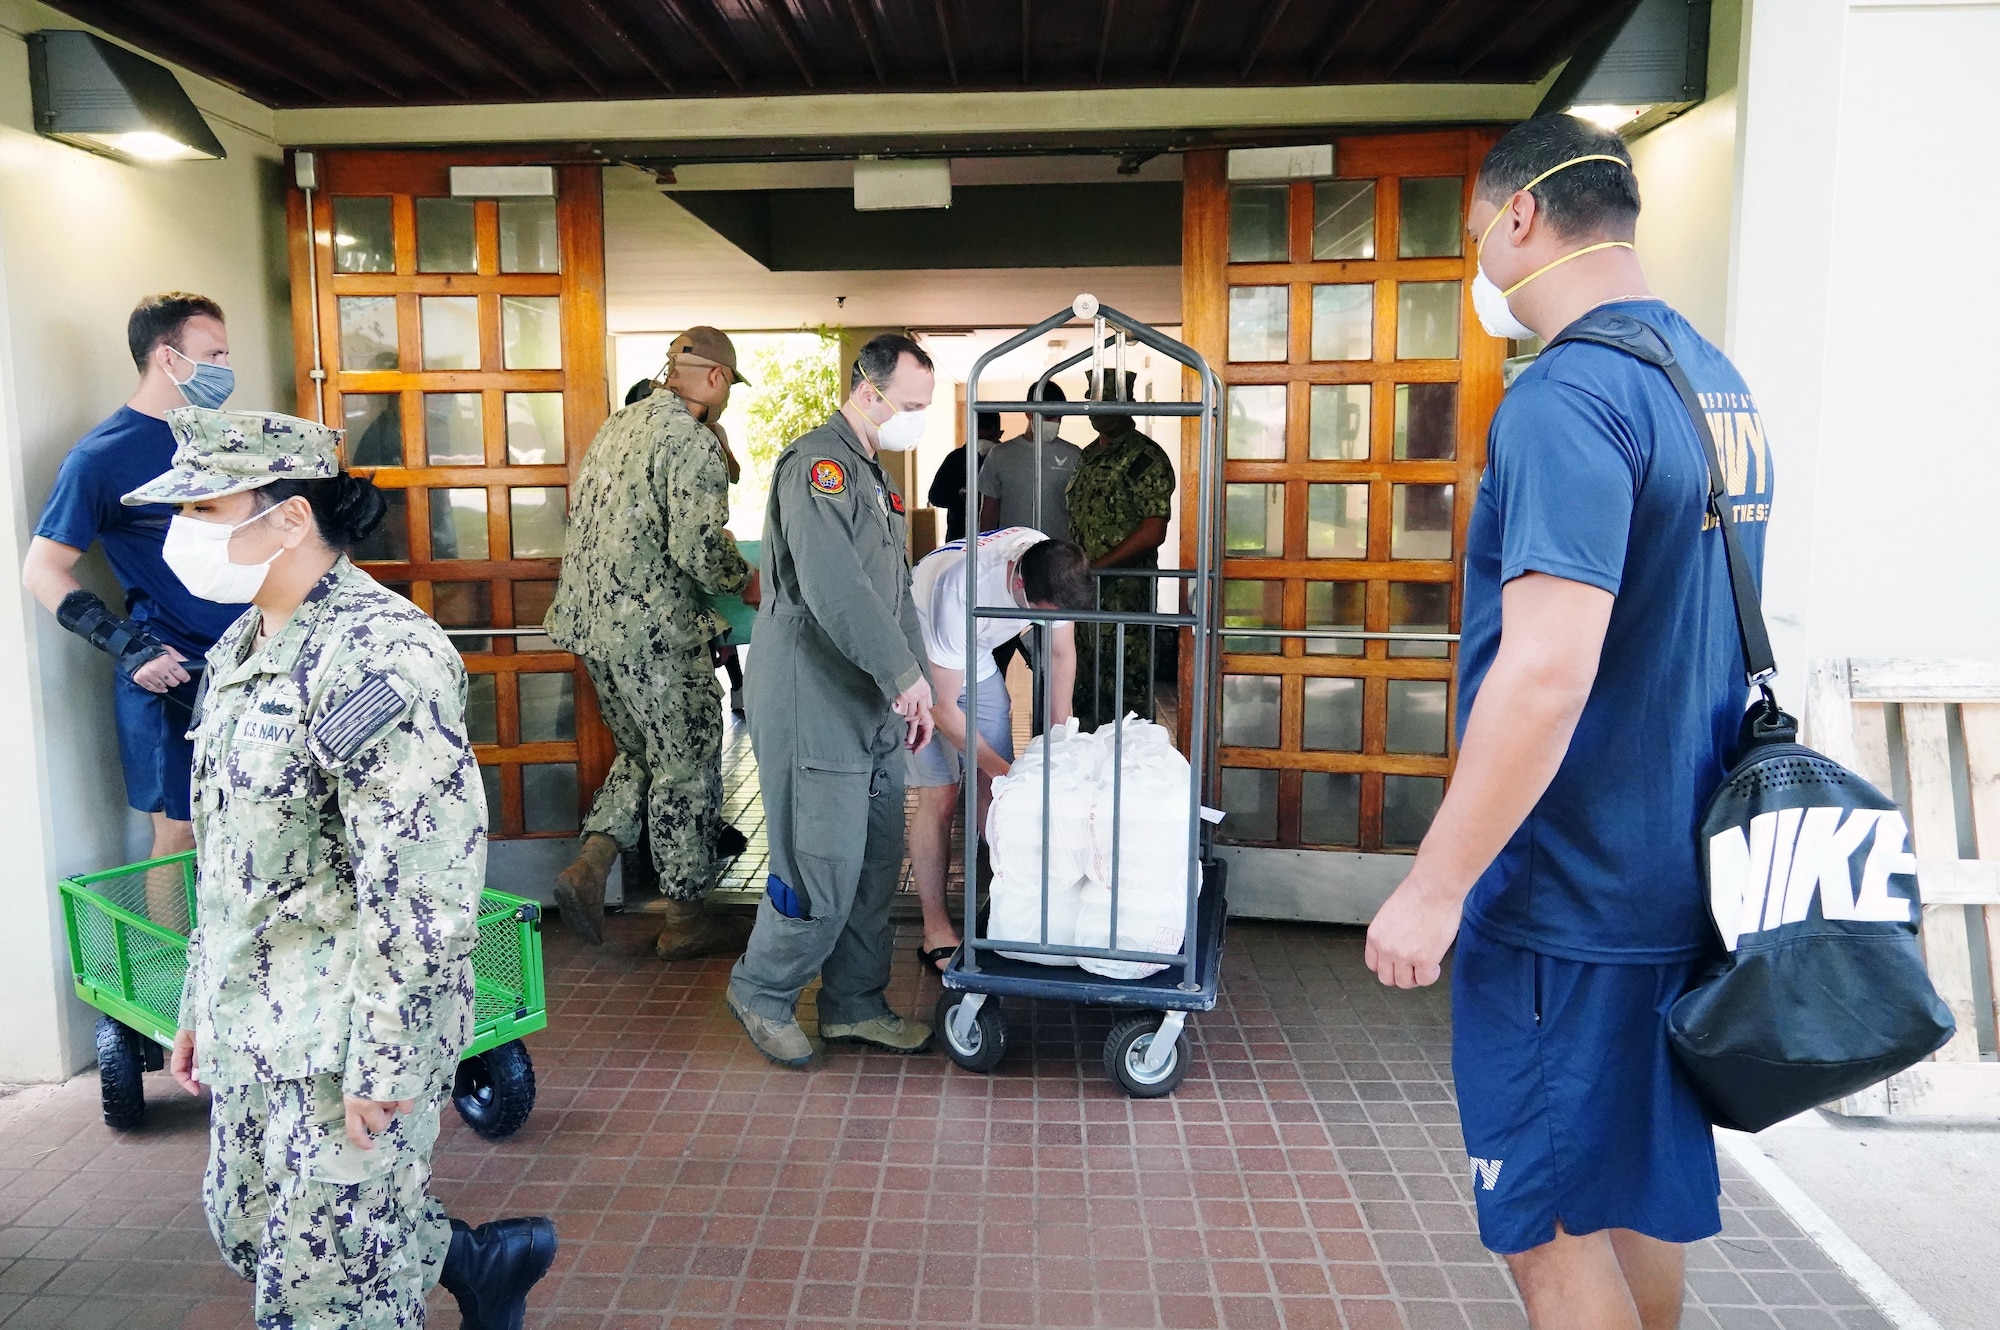 U.S. Navy Sailors and U.S. Air Force Airmen deliver meals from the Hale Aina Dining Facility to newly arrived personnel placed on restriction of movement on Joint Base Pearl Harbor-Hickam, Hawaii, April 16, 2020. Volunteers with the COVID-19 Support Team distributed meals and essentials to ROM military personnel in the midst of the COVID-19 pandemic. (U.S. Air Force photos by Airman 1st Class Erin Baxter)